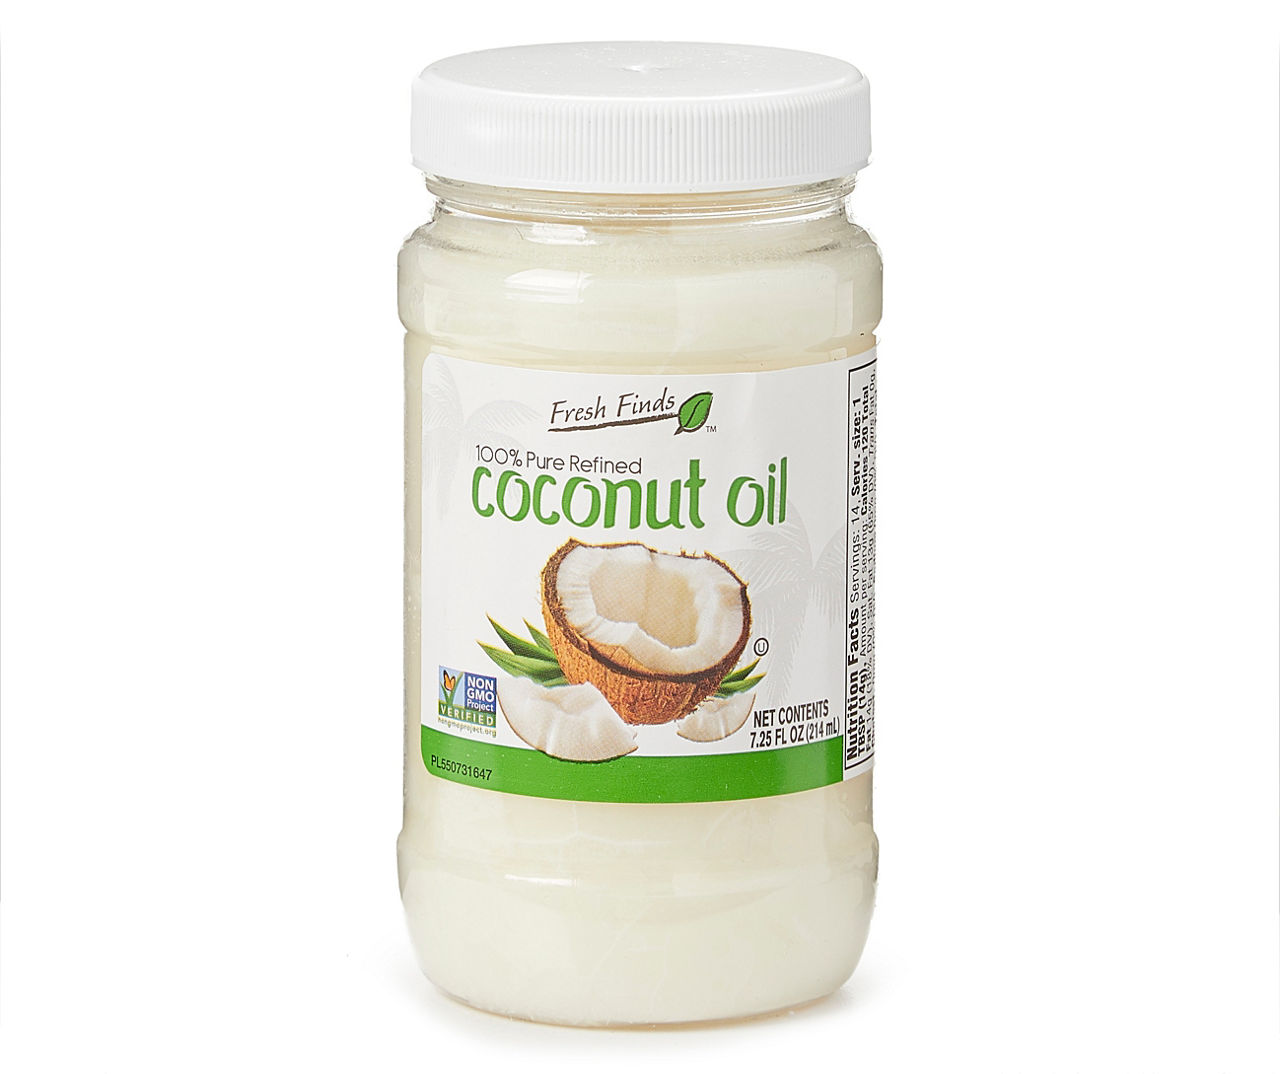 Fresh Finds Pure Refined Coconut Oil, 7.25 Oz. | Big Lots